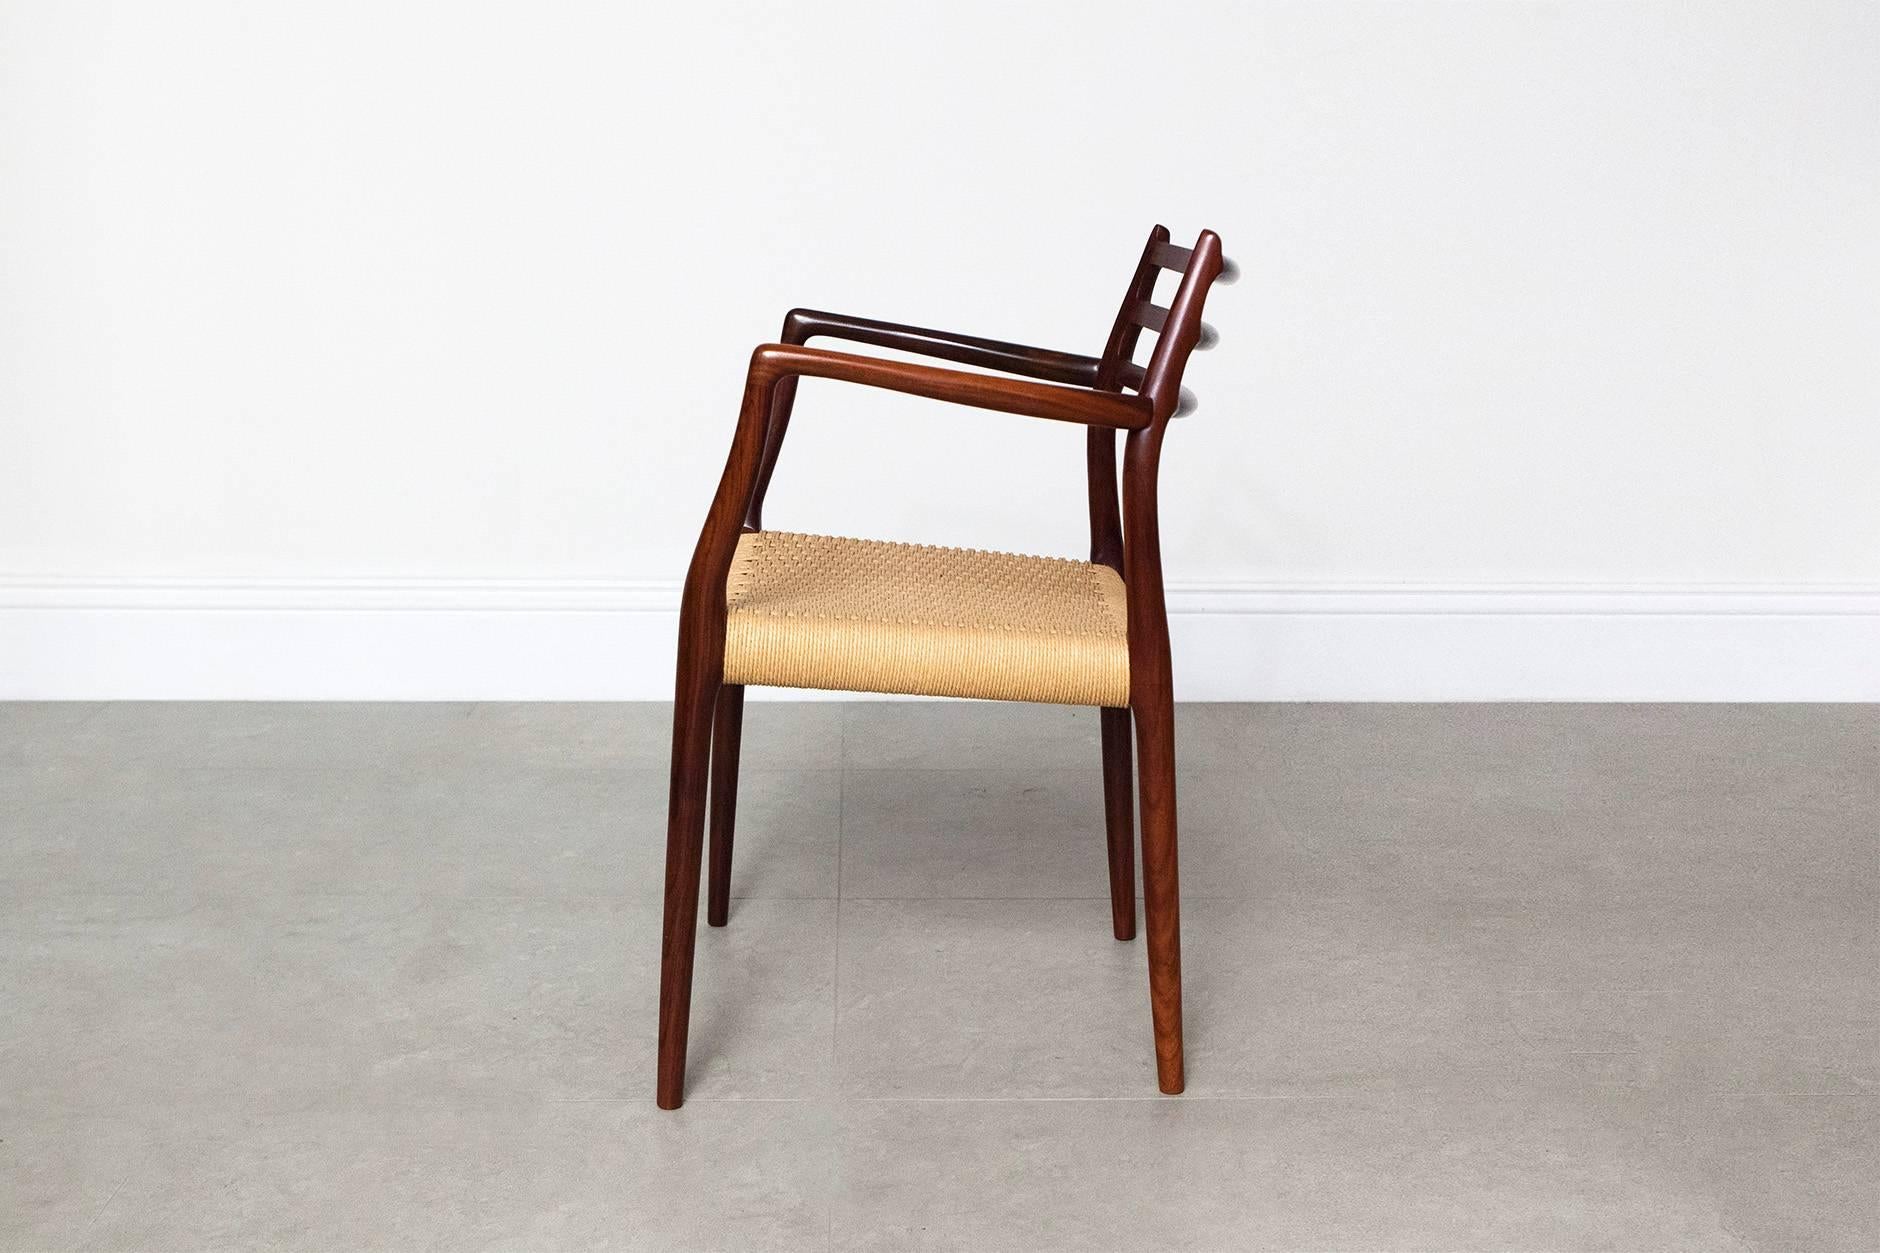 The award winning model 62 chair from Danish designer Niels Moller for J.L Moller Mobelfabrik, 1962. This rare example comes with original woven paper cord seat in near-mint condition. 